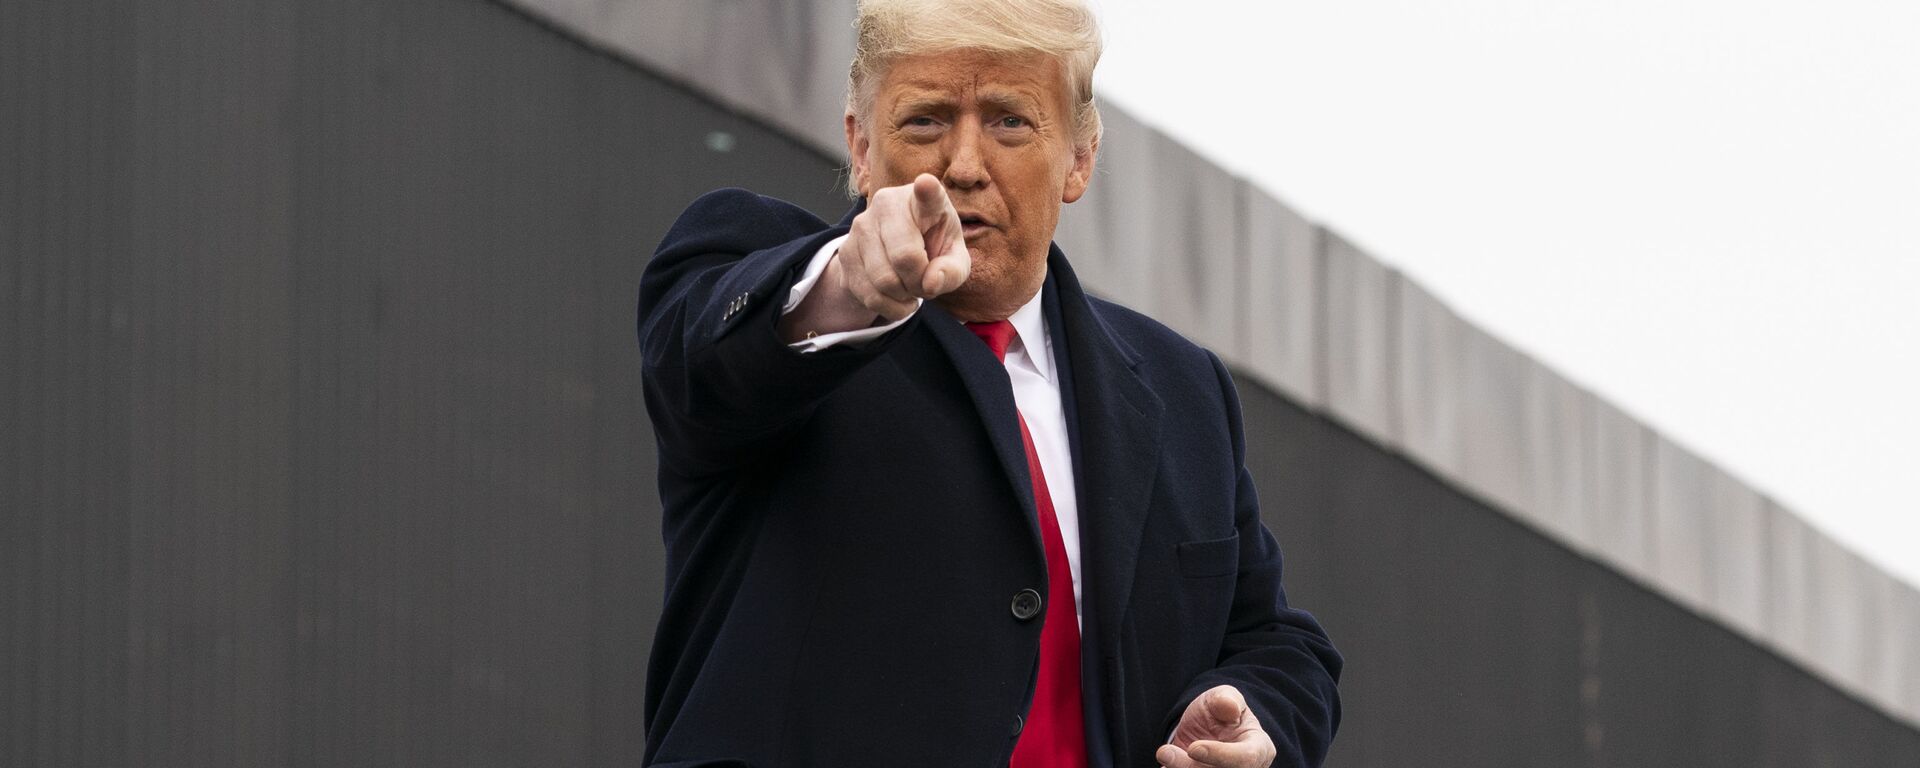 President Donald Trump points to a member of the audience after speaking near a section of the U.S.-Mexico border wall, Tuesday, Jan. 12, 2021, in Alamo, Texas - Sputnik International, 1920, 26.03.2021